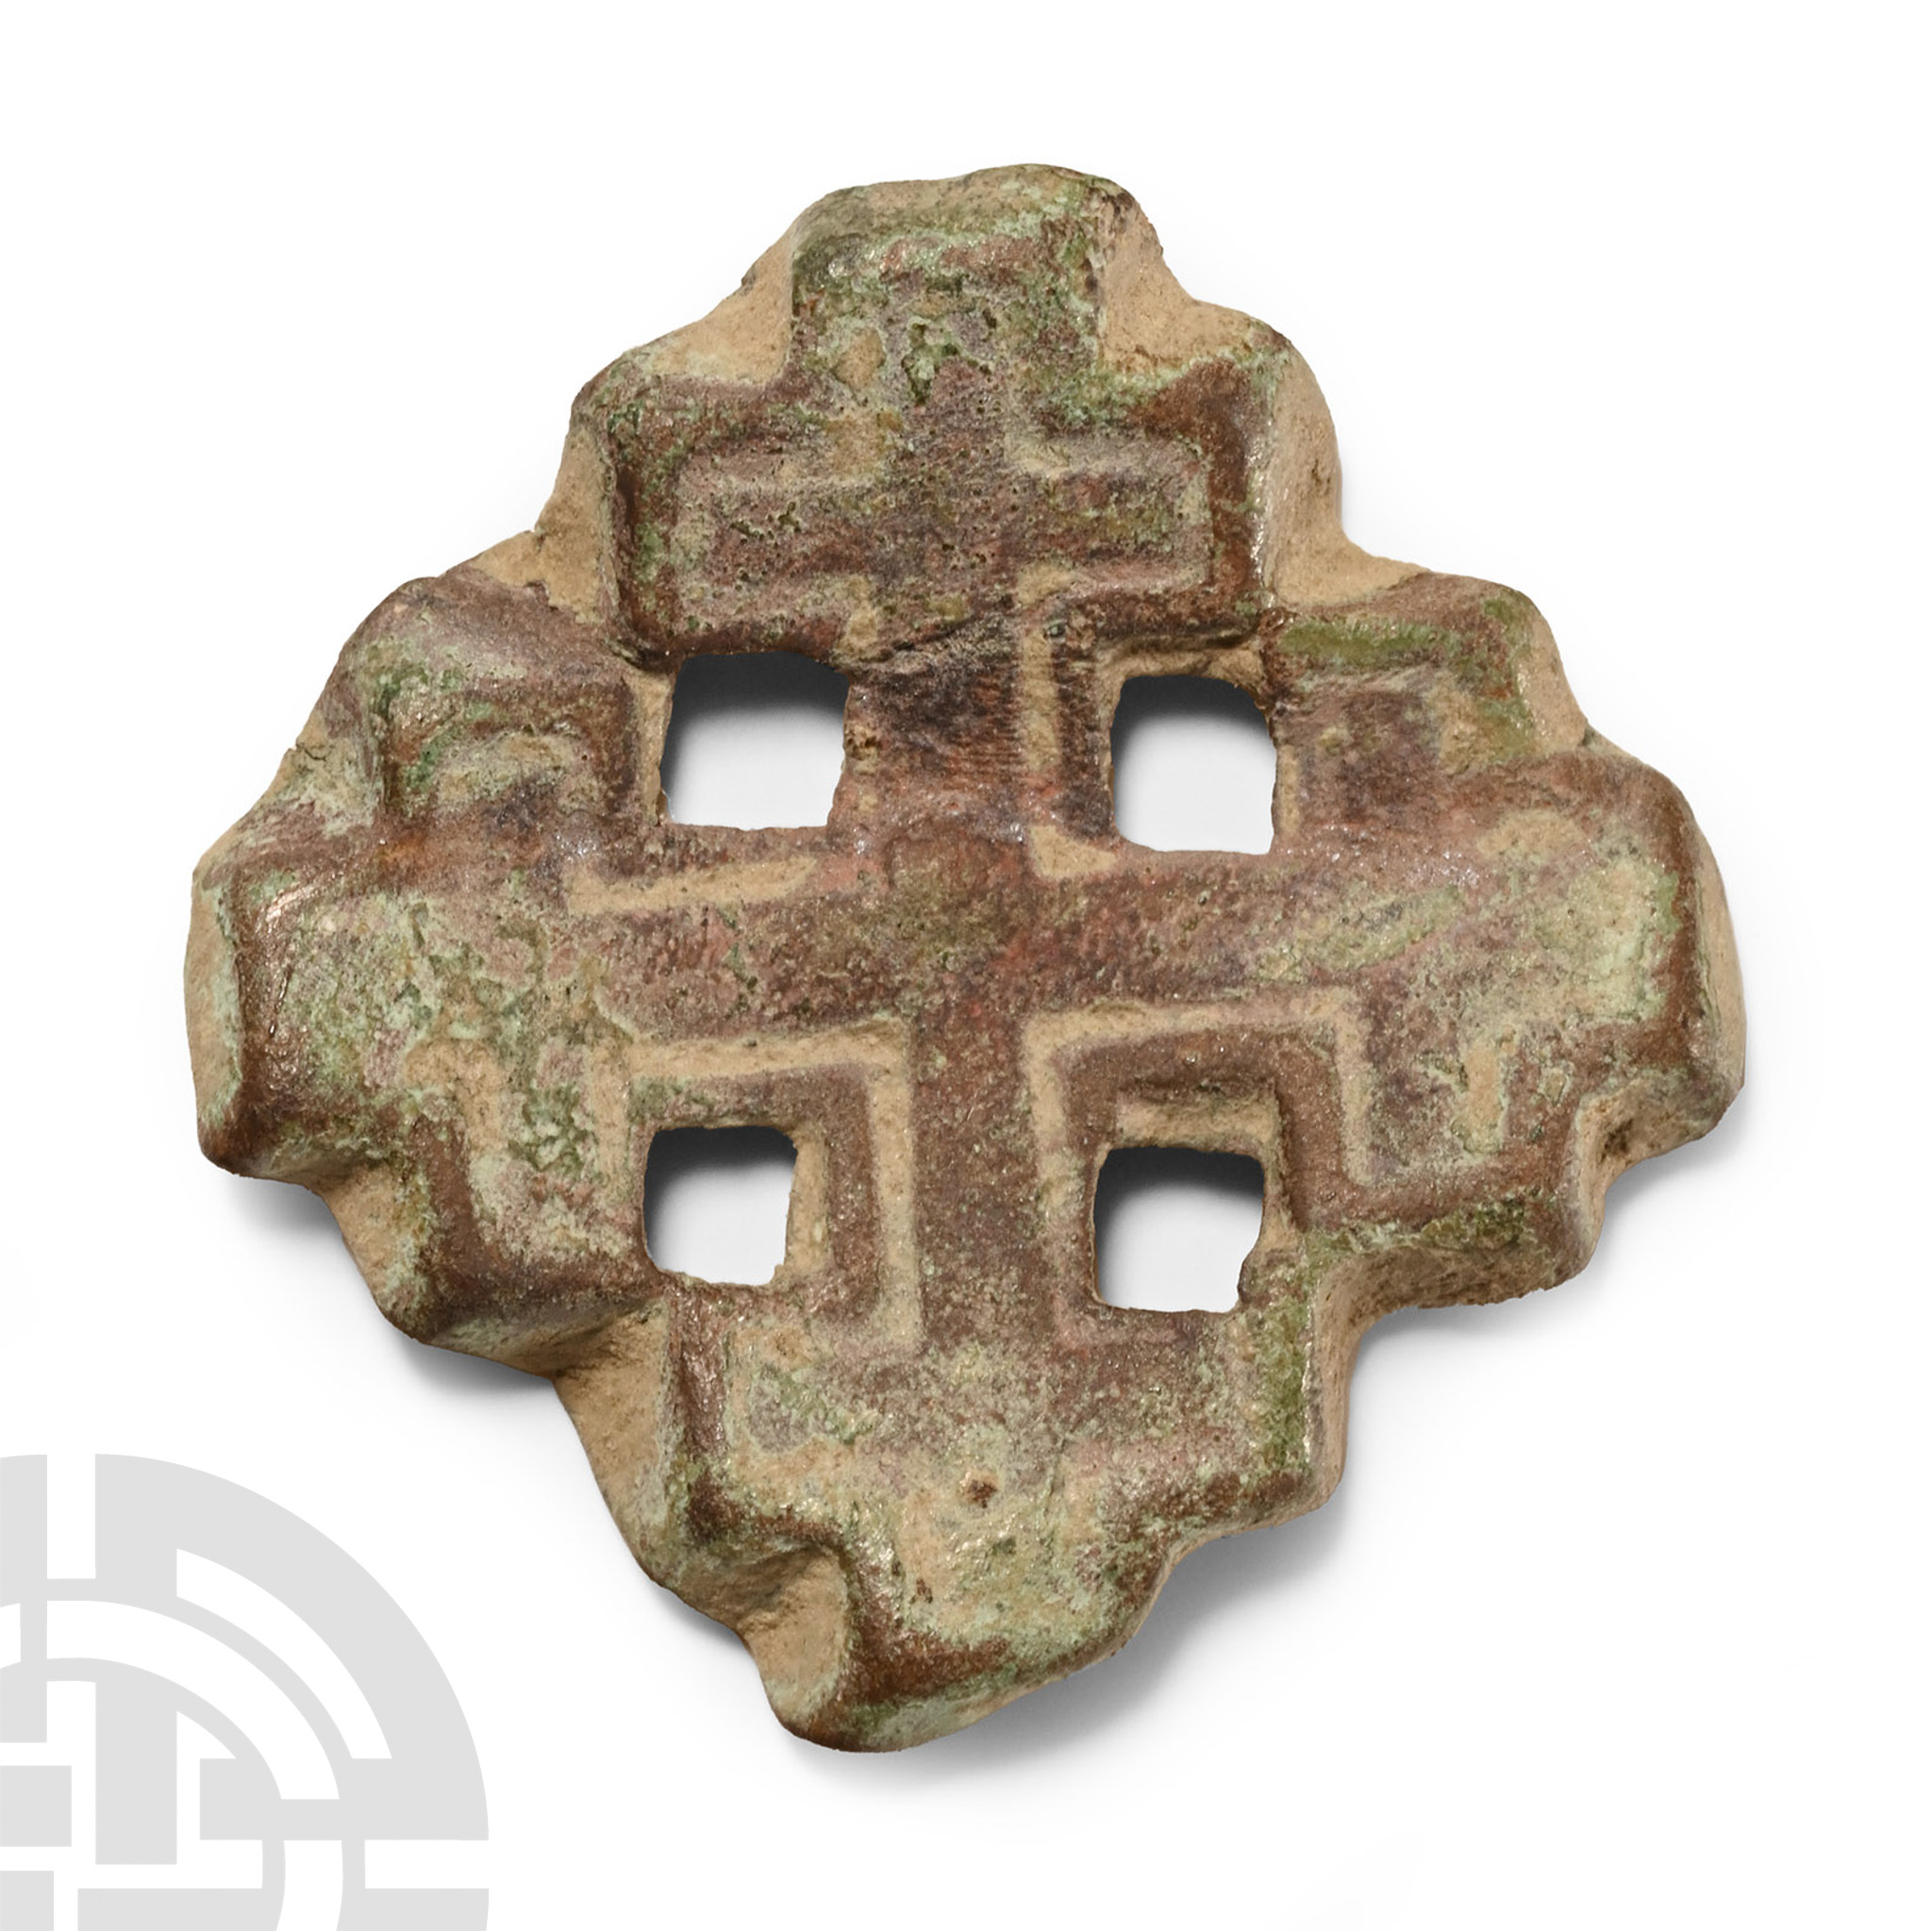 Medieval Bronze Knight's Holy Sepulchre Badge